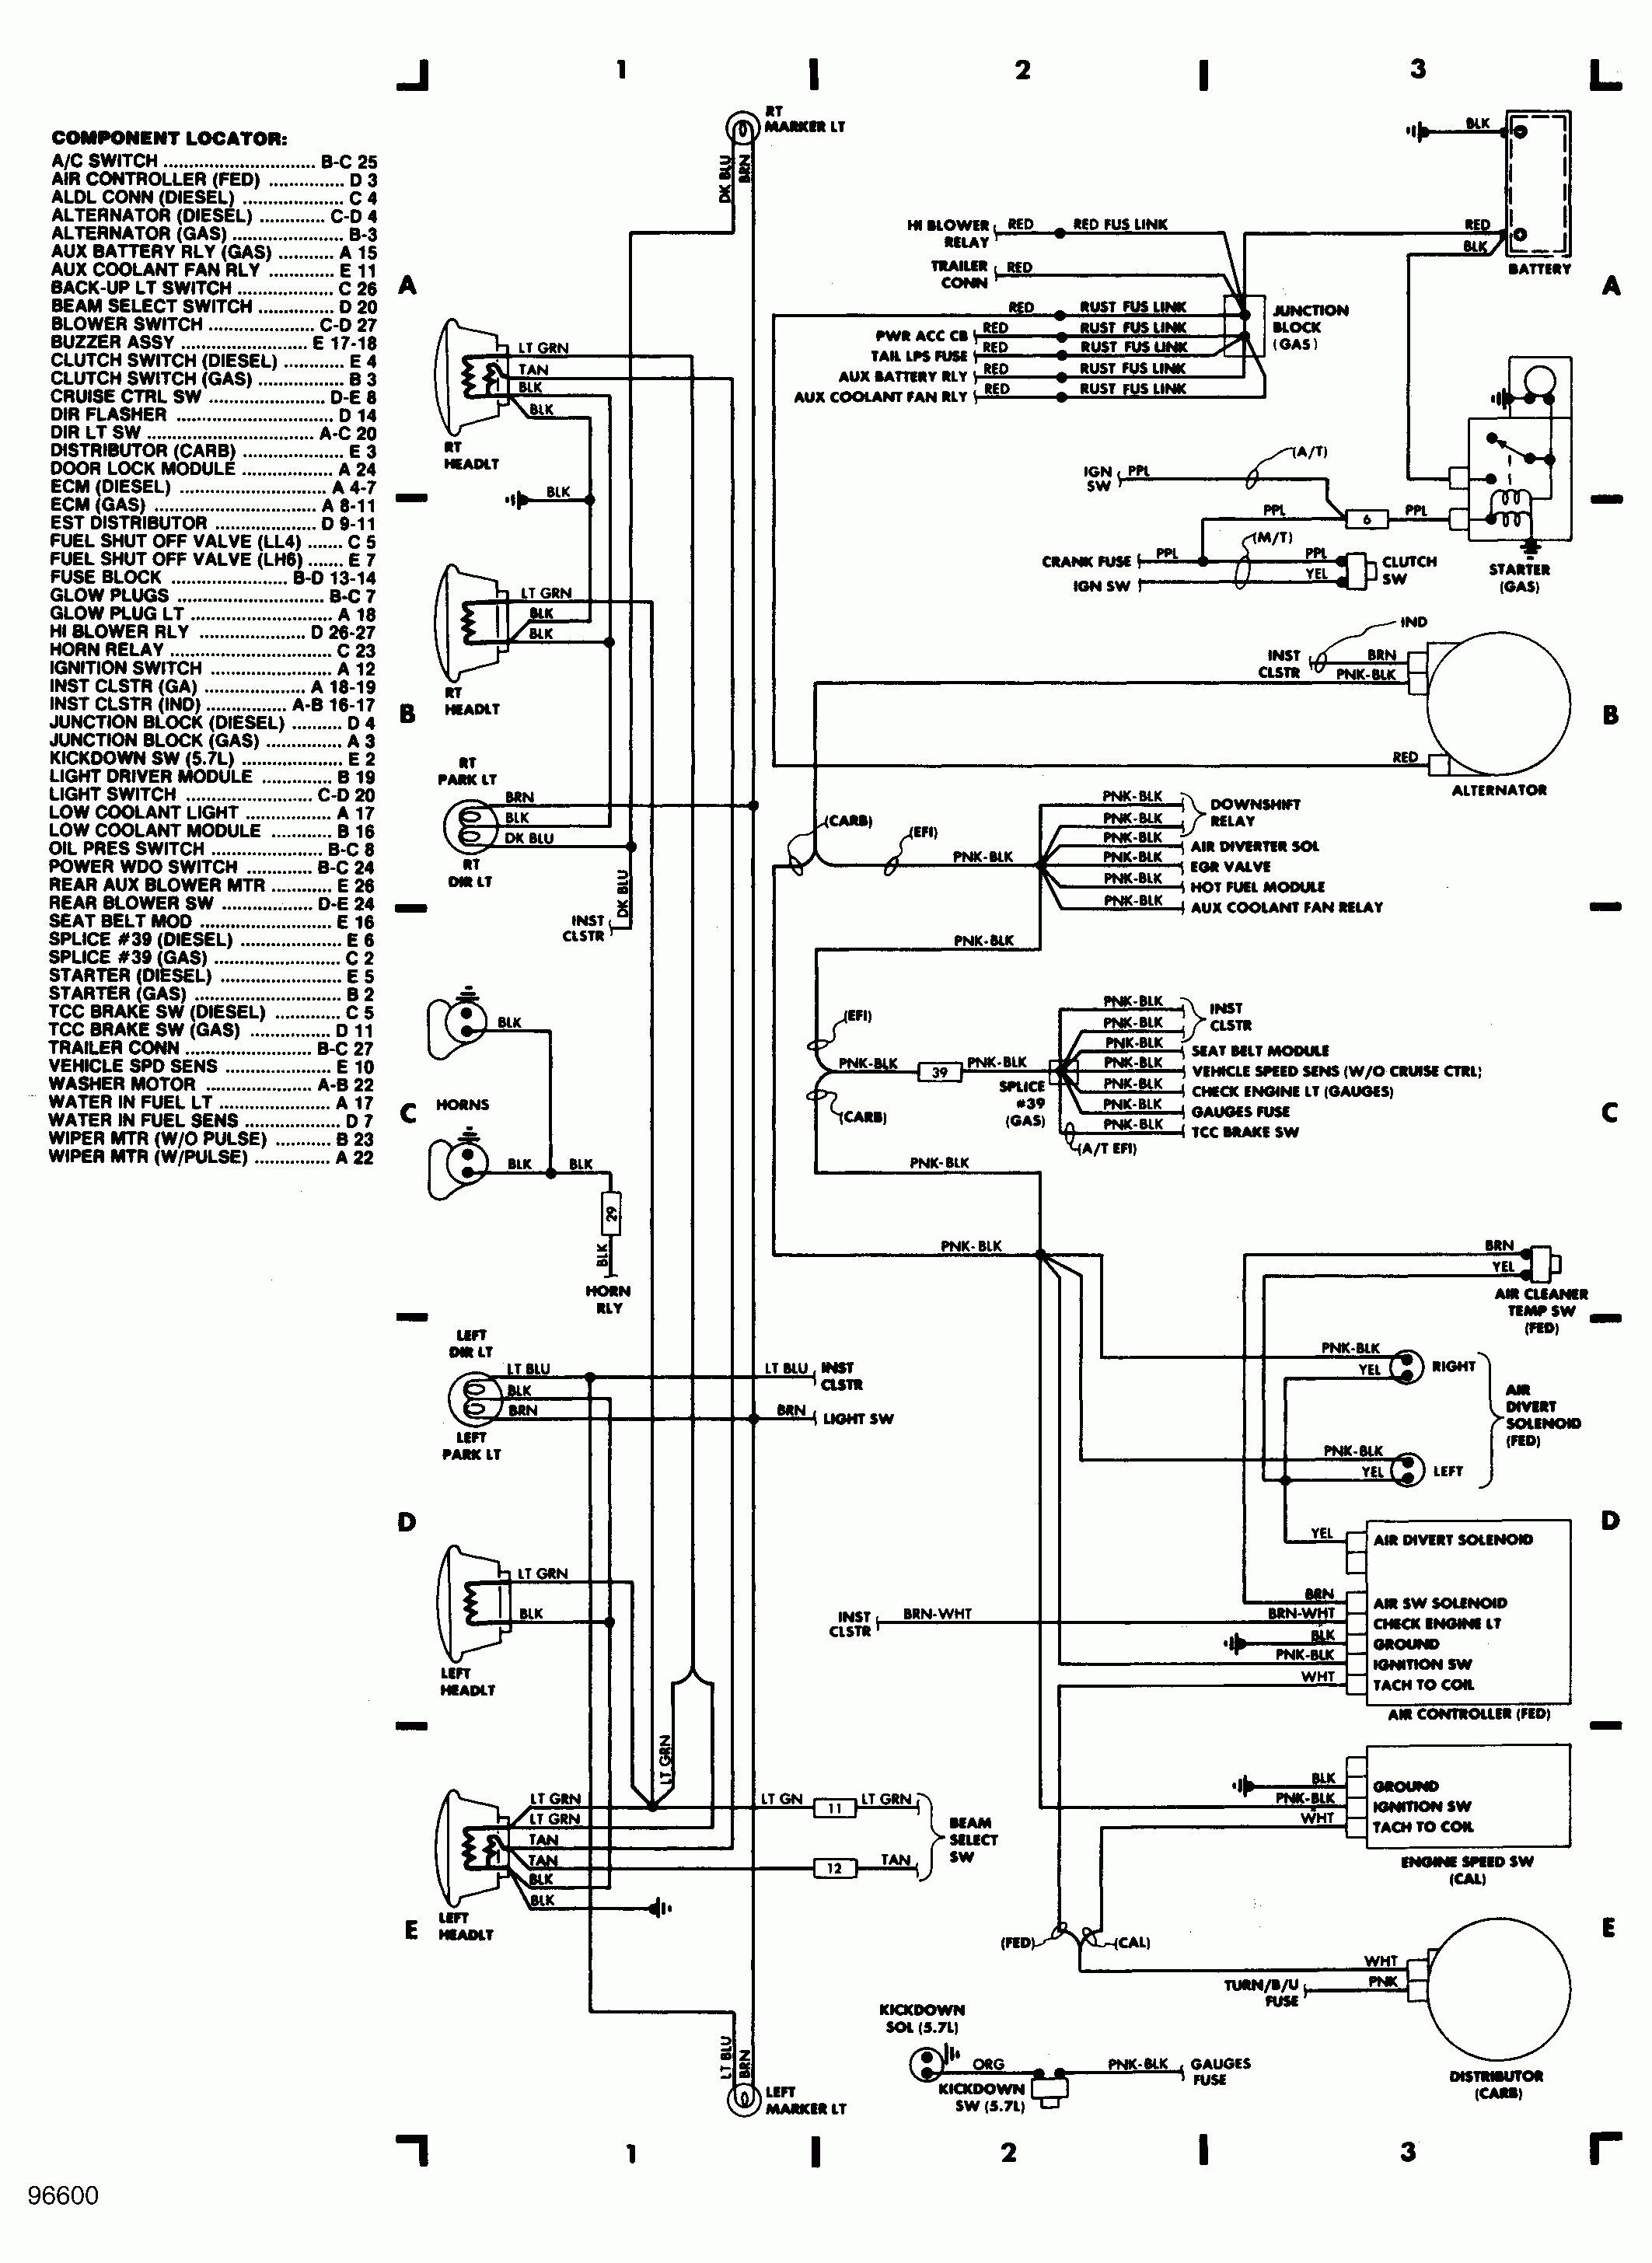 4L60E Neutral Safety Switch Wiring Diagram - Cadician's Blog